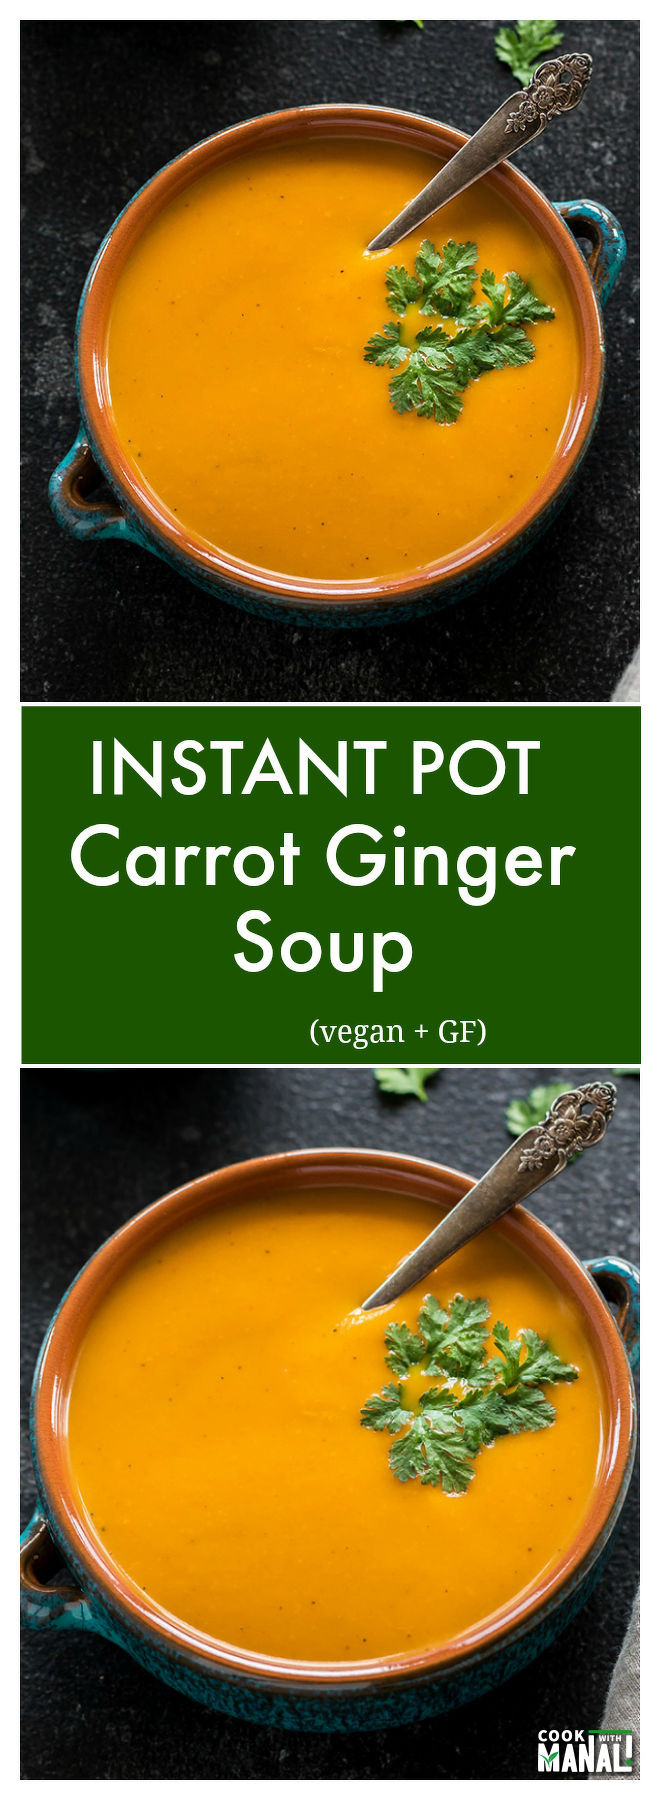 Carrot Soup Instant Pot
 Instant Pot Carrot Ginger Soup Cook With Manali